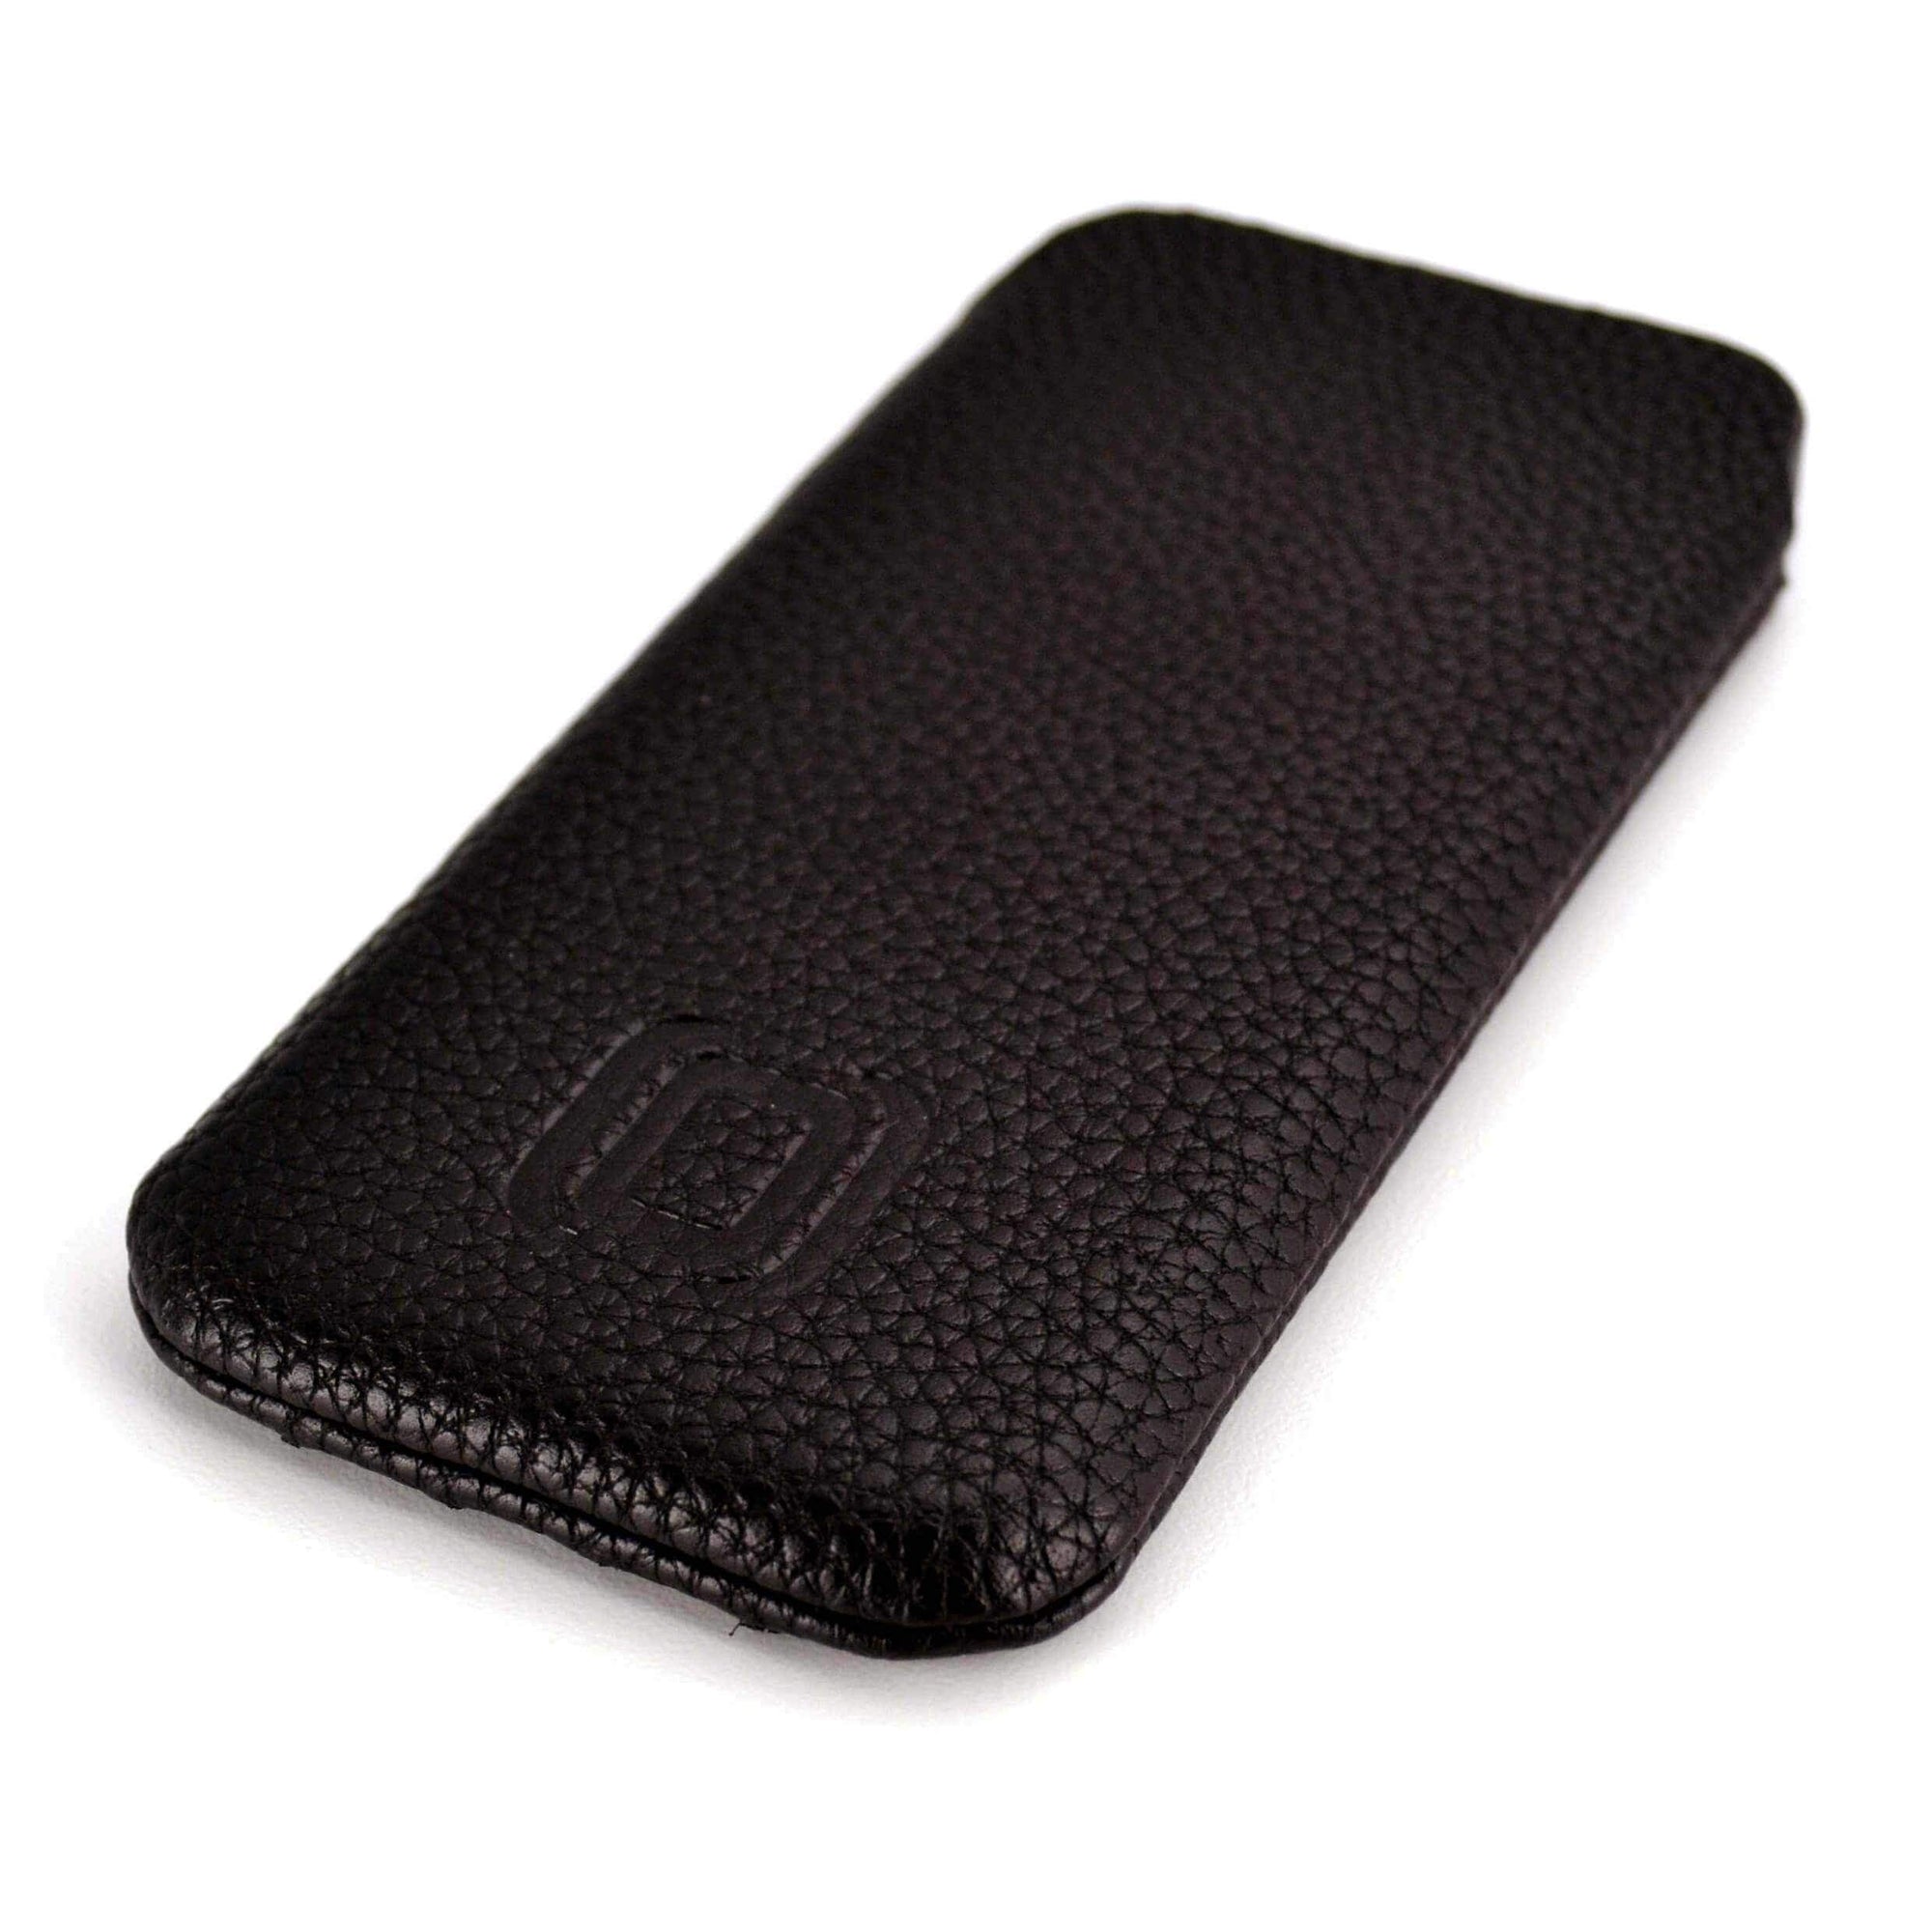 Ultra Slim Synthetic Leather Sleeve for HTC One M8 - Dark Brown Misc. Sleeve Dockem 